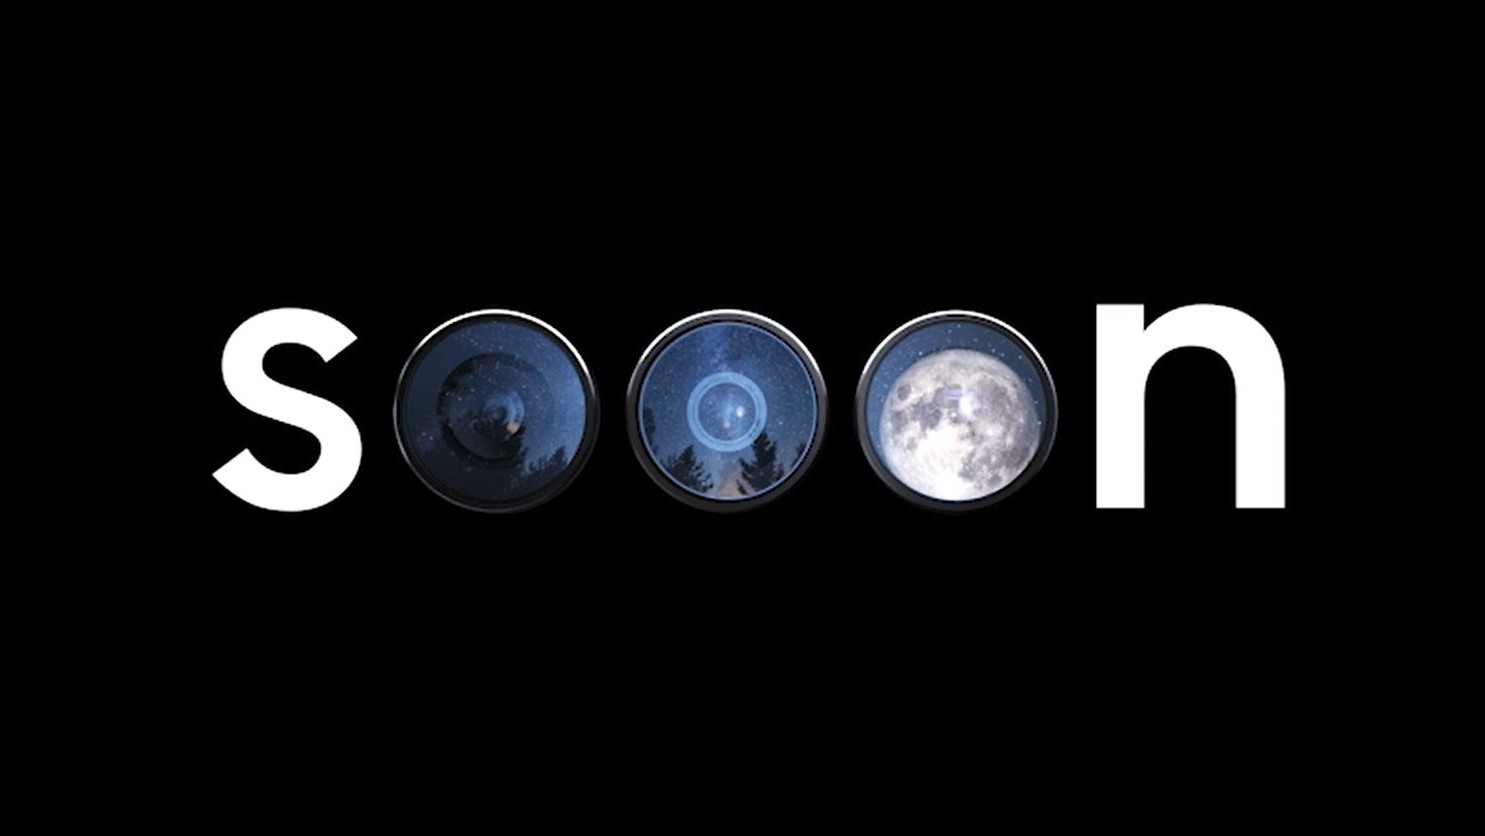 The word "soon" with three Os that resemble camera lenses